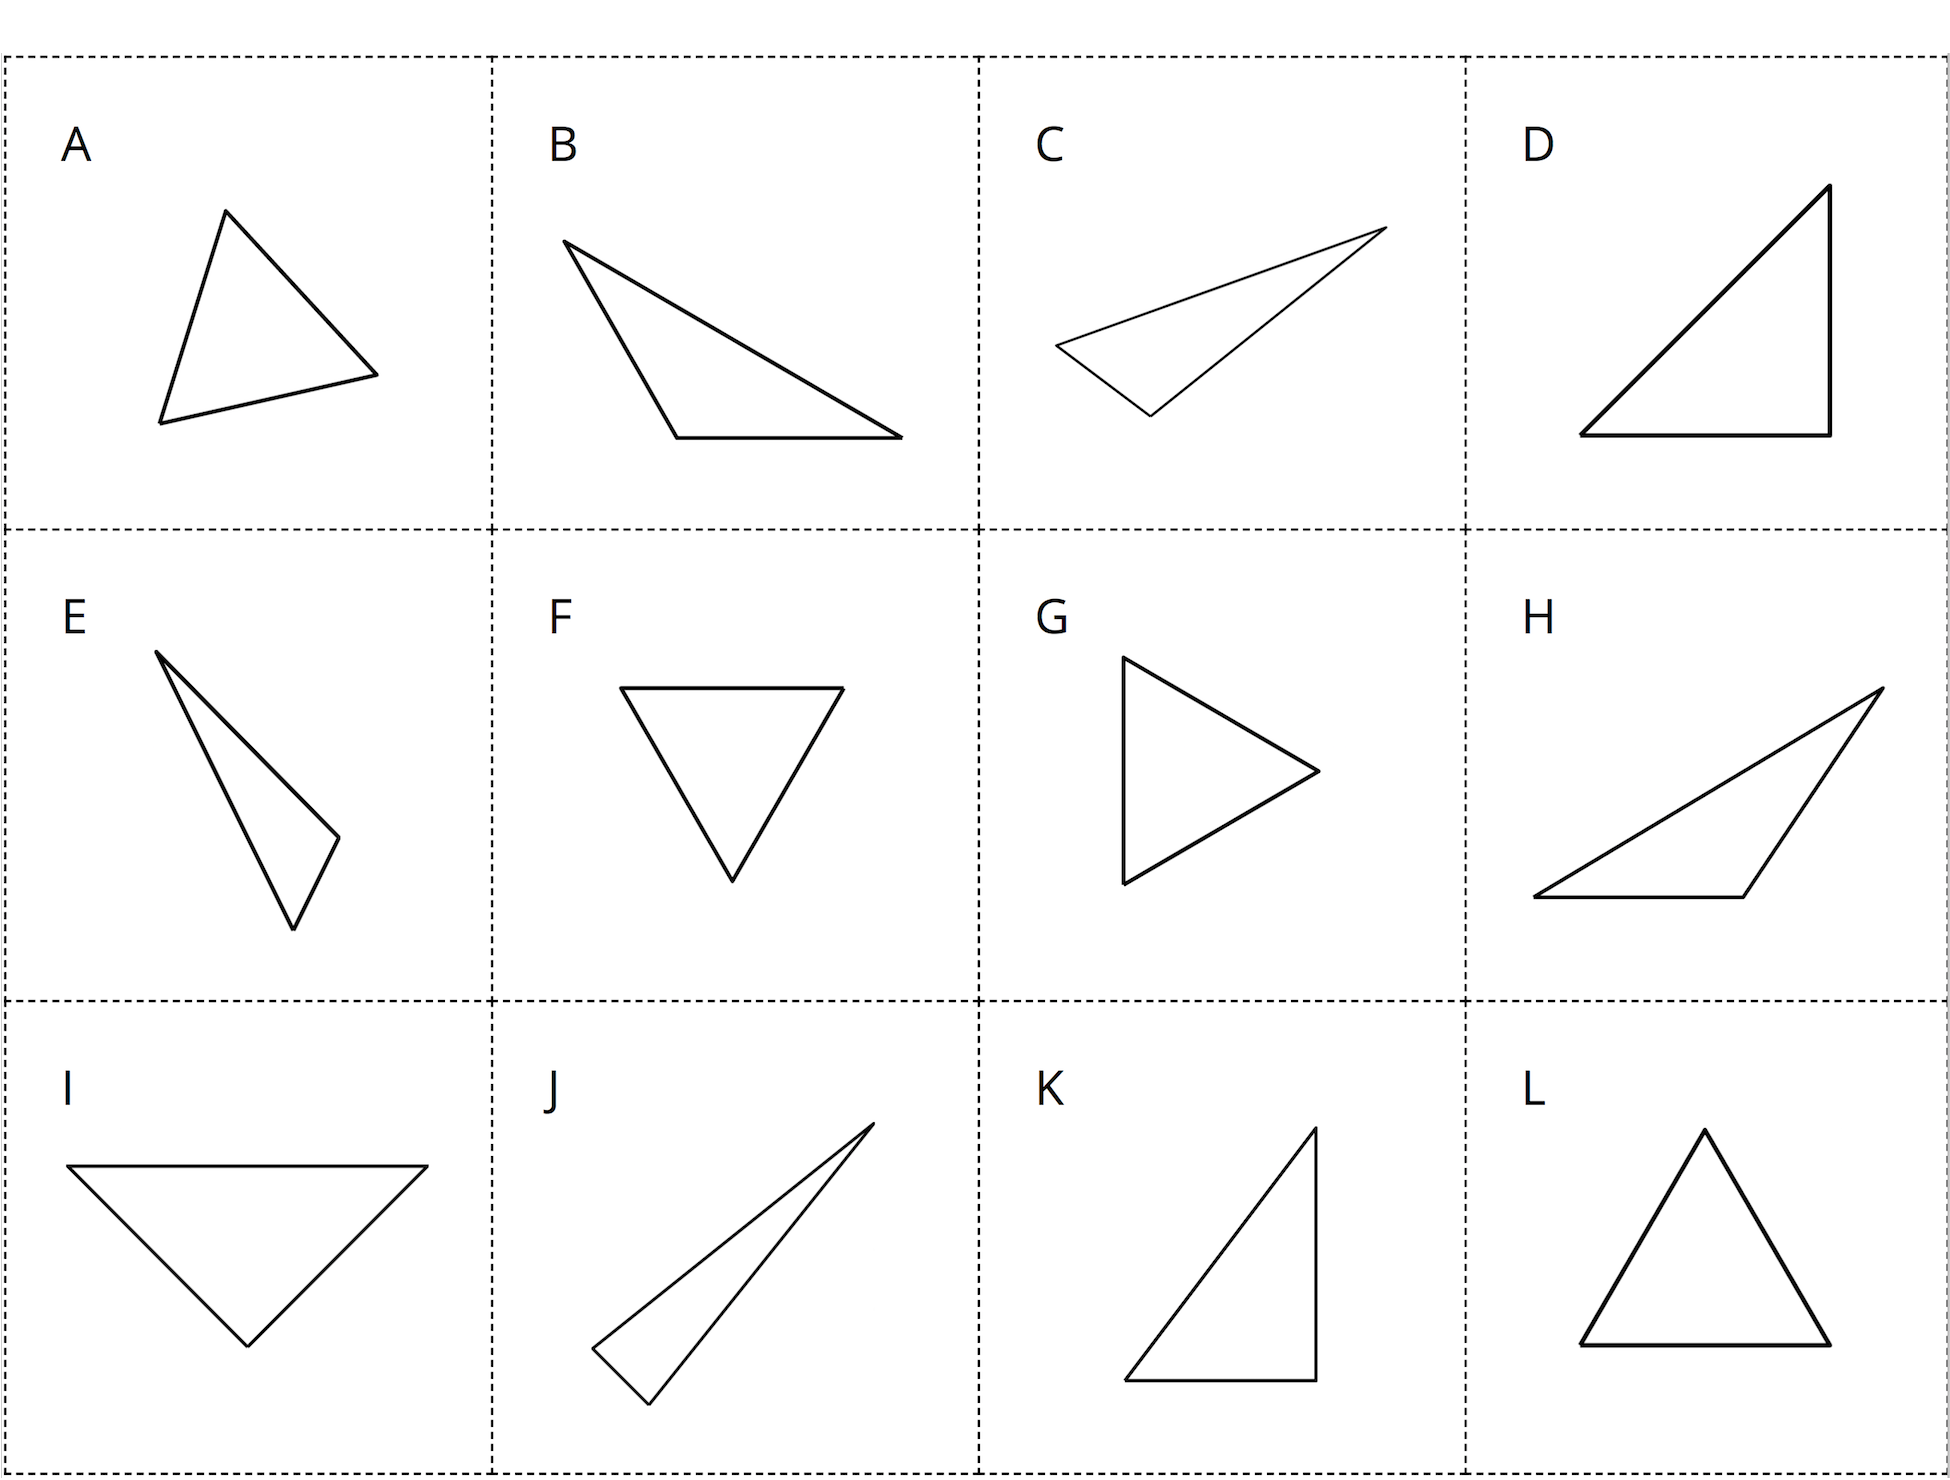 Card sort with triangles.